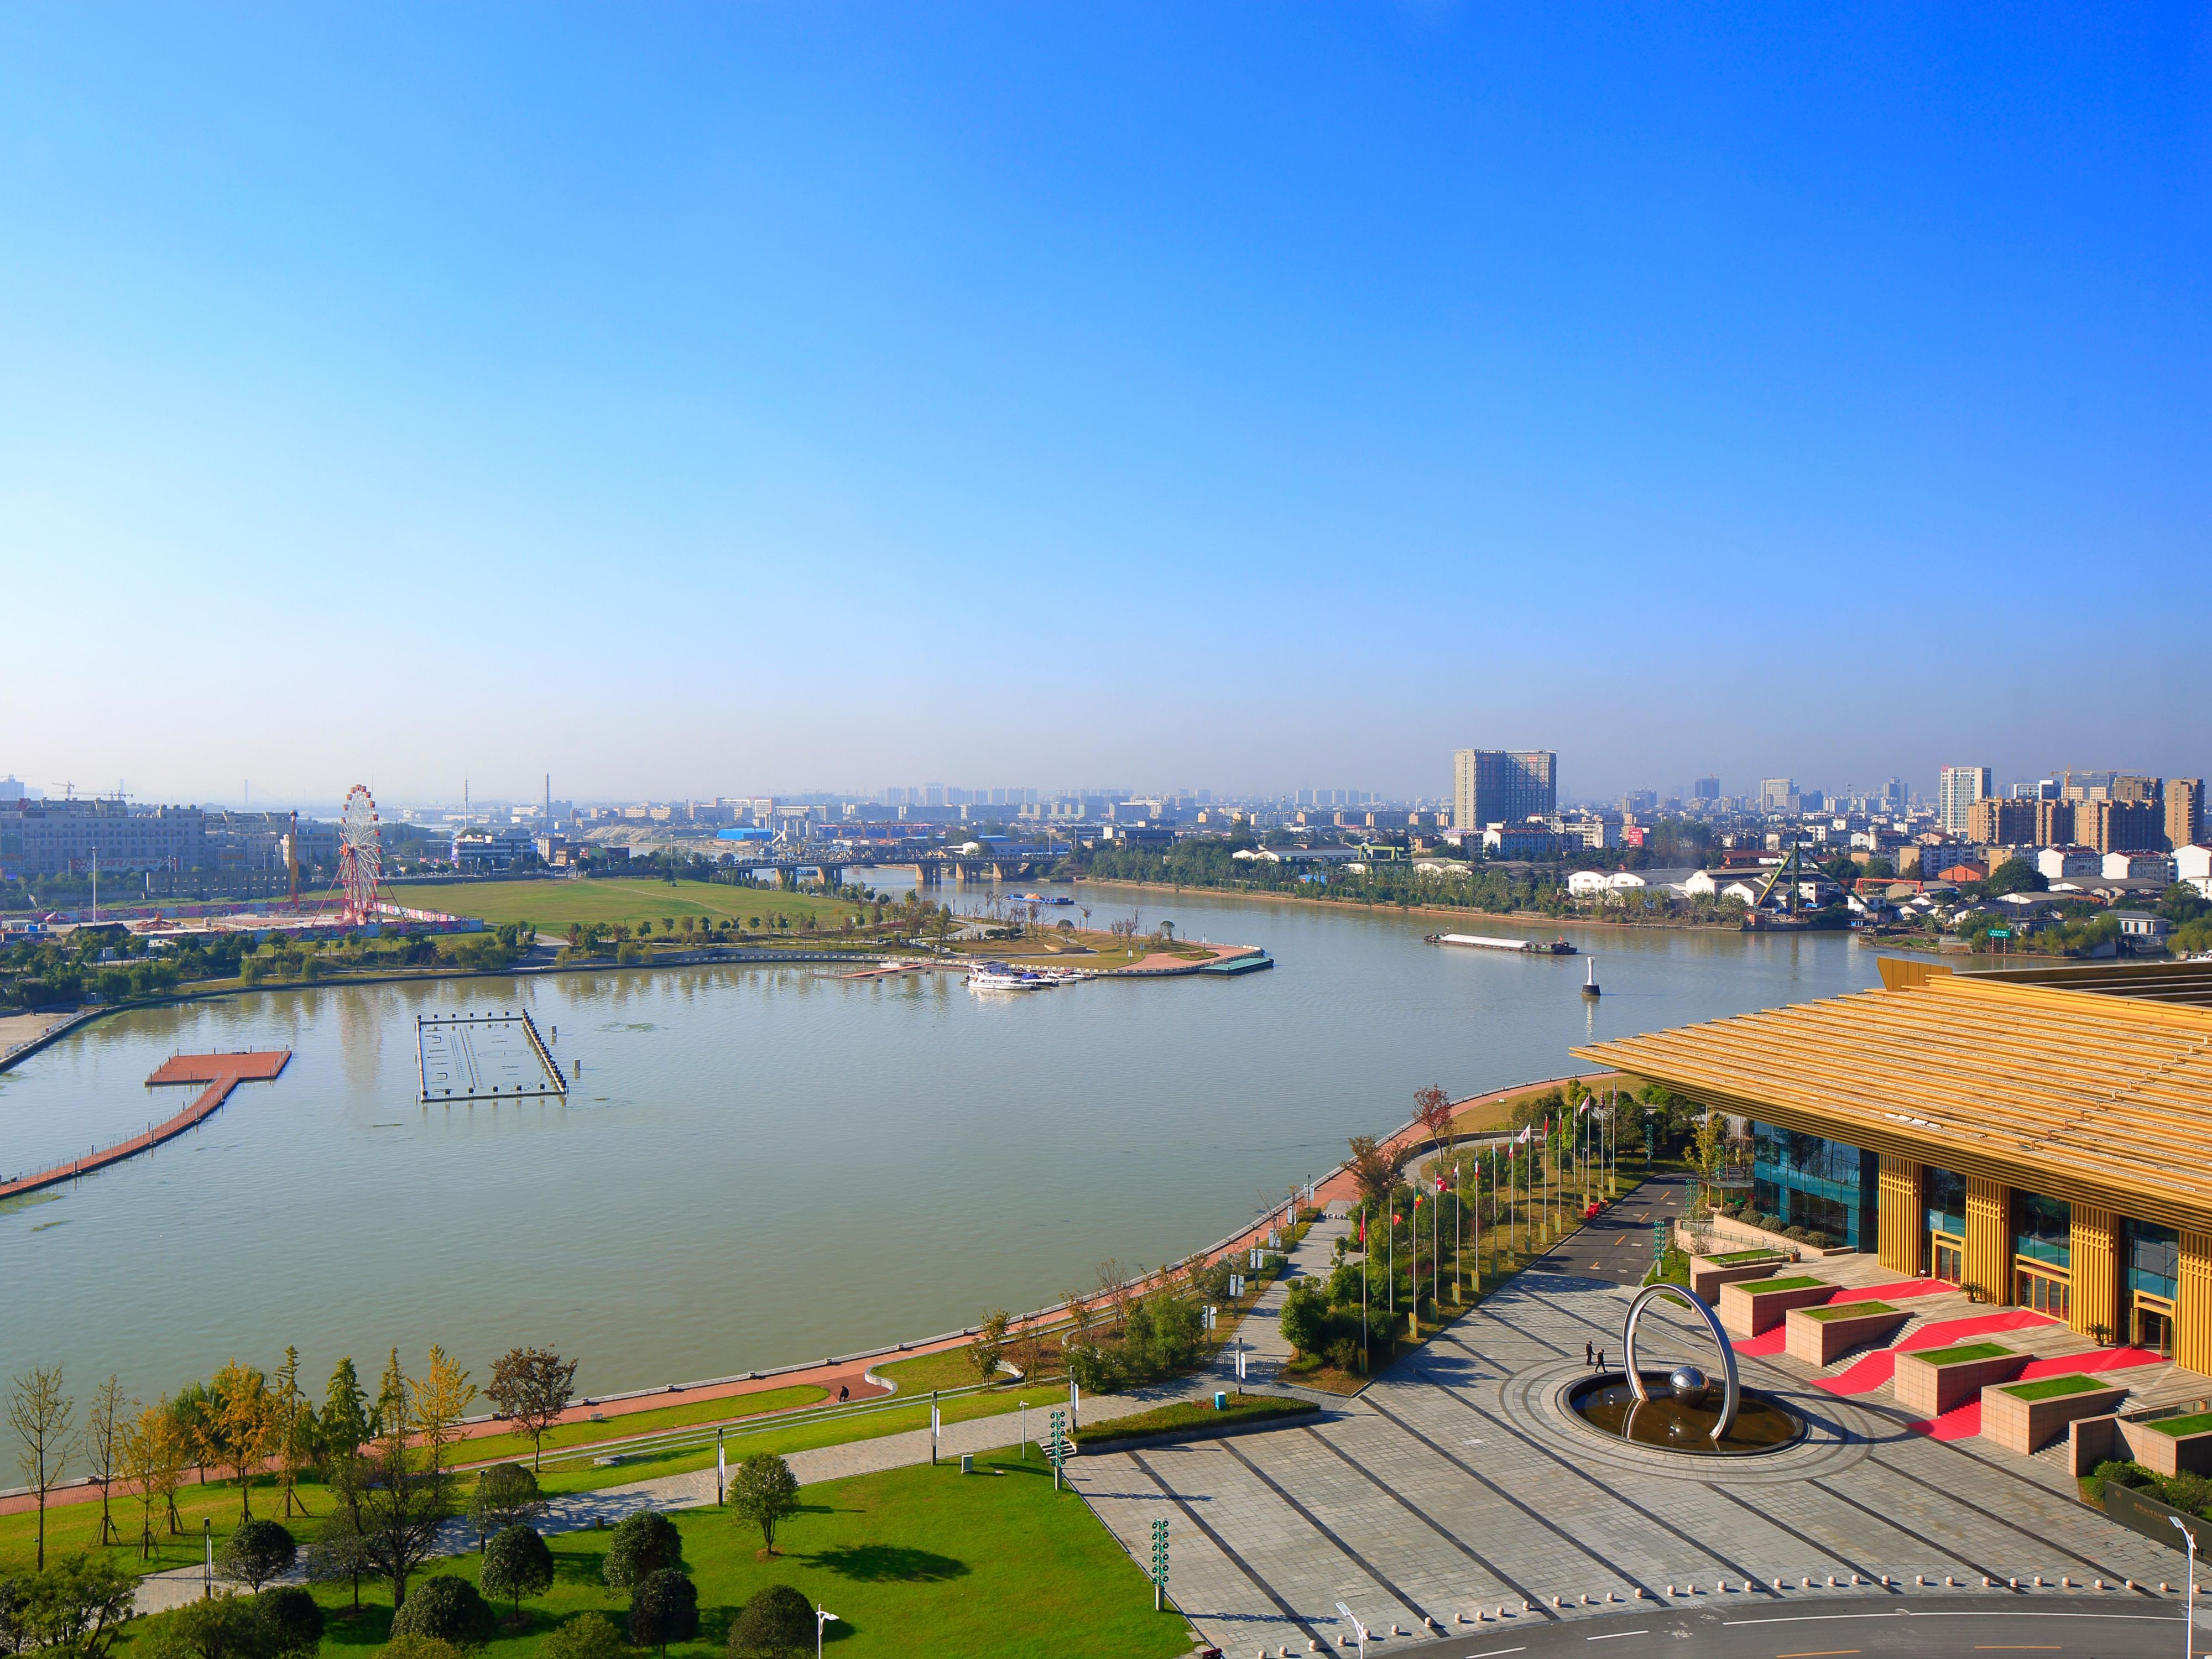 The Crowne Plaza Yangzhou is located in the scenic Guangling District of Yangzhou, adjacent to the Beijing Hangzhou Convention Center and only a few steps away from the banks of the Beijing Hangzhou Grand Canal. The hotel is located along the Beijing Shanghai high-speed railway line, with convenient and fast transportation. It takes about 15 minute